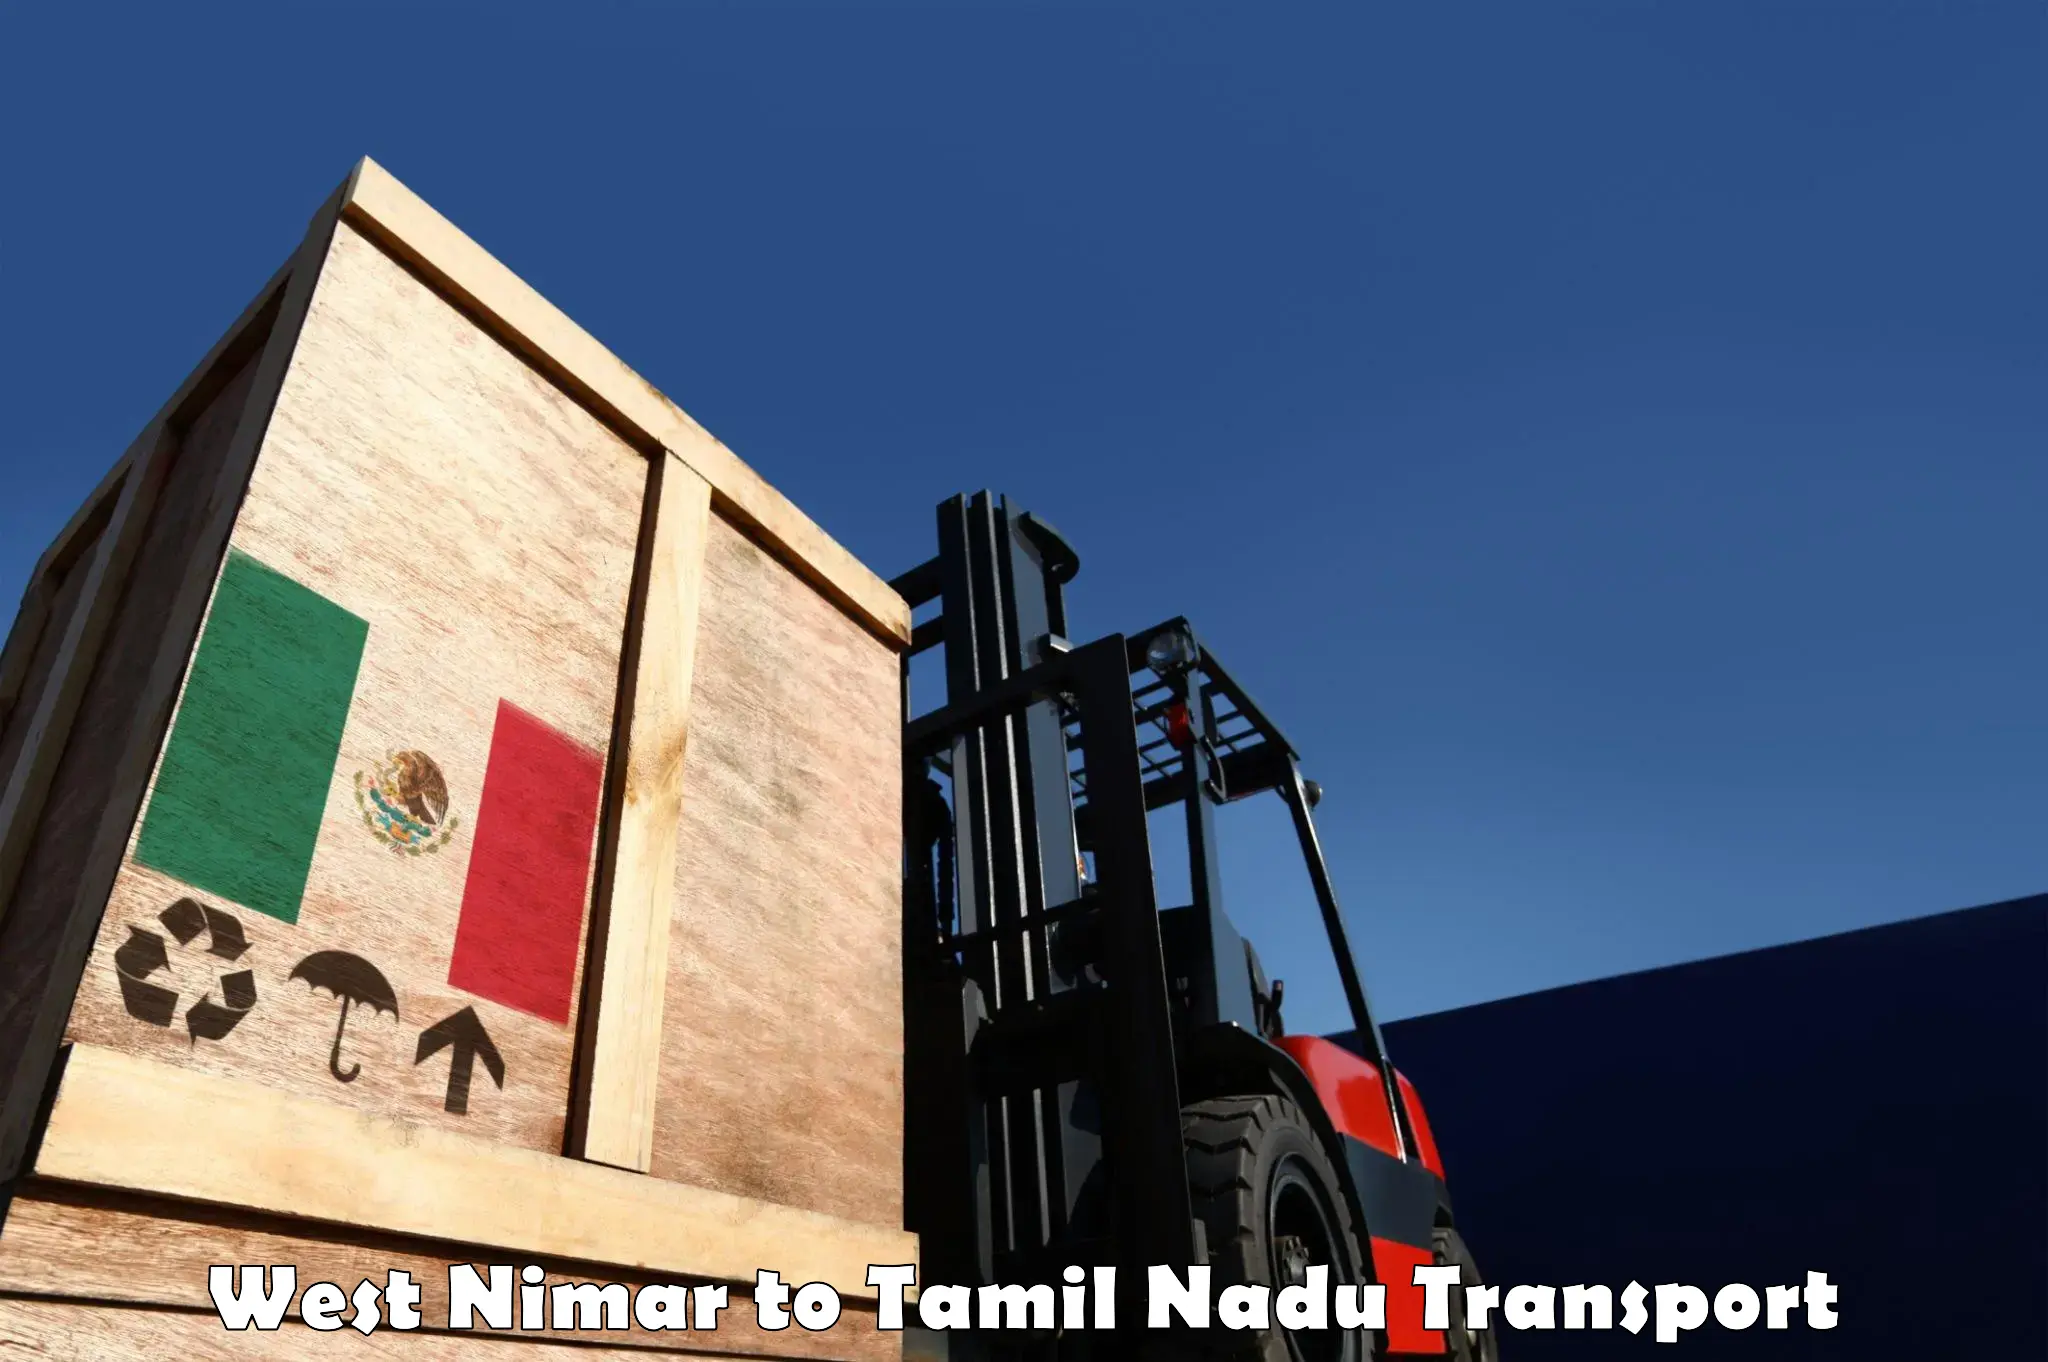 Part load transport service in India West Nimar to Anthiyur